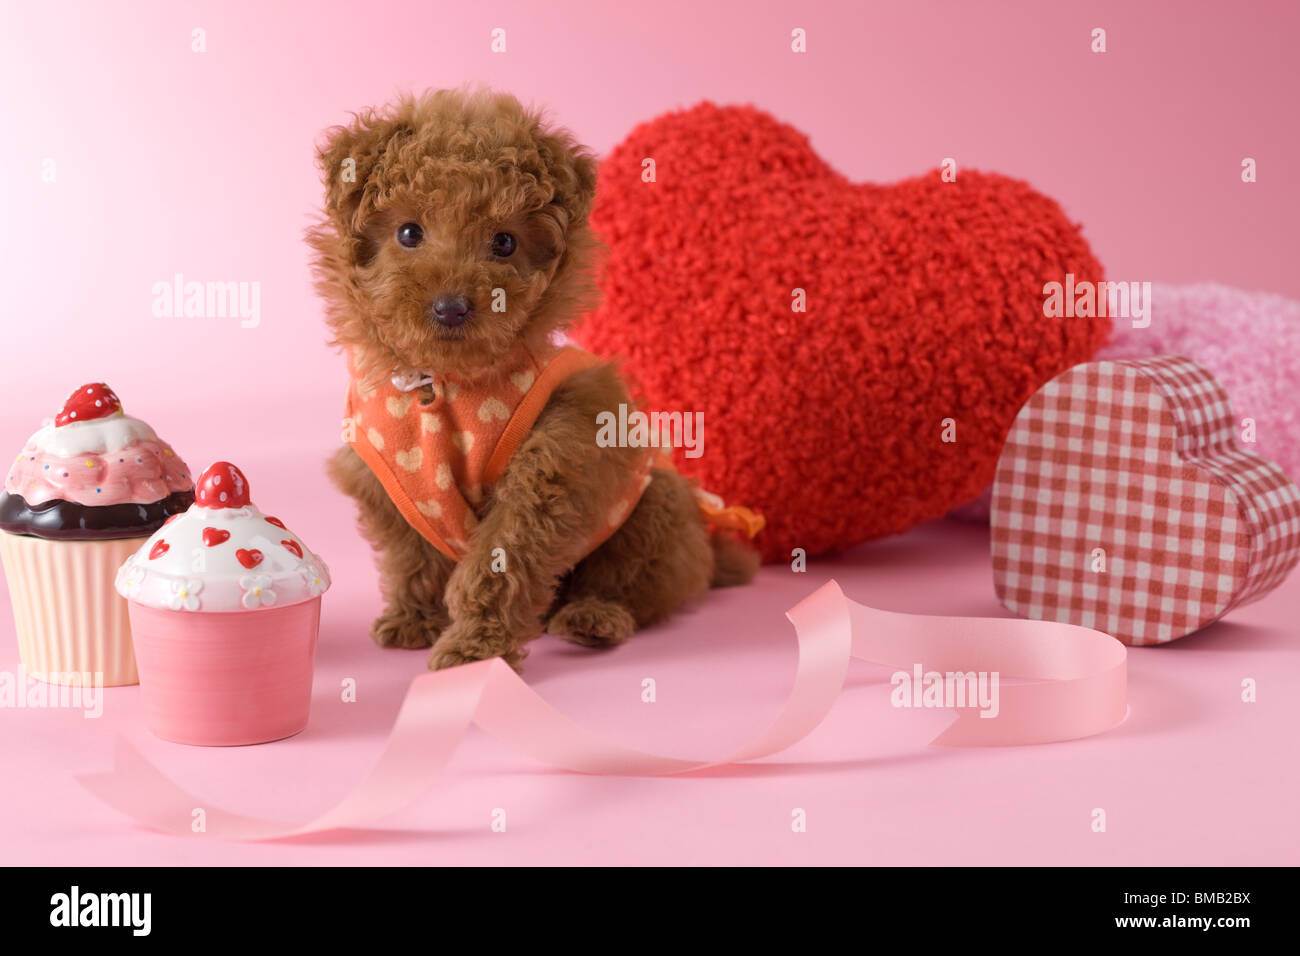 Toy Poodle Puppy and Heart Shaped Ornaments Stock Photo